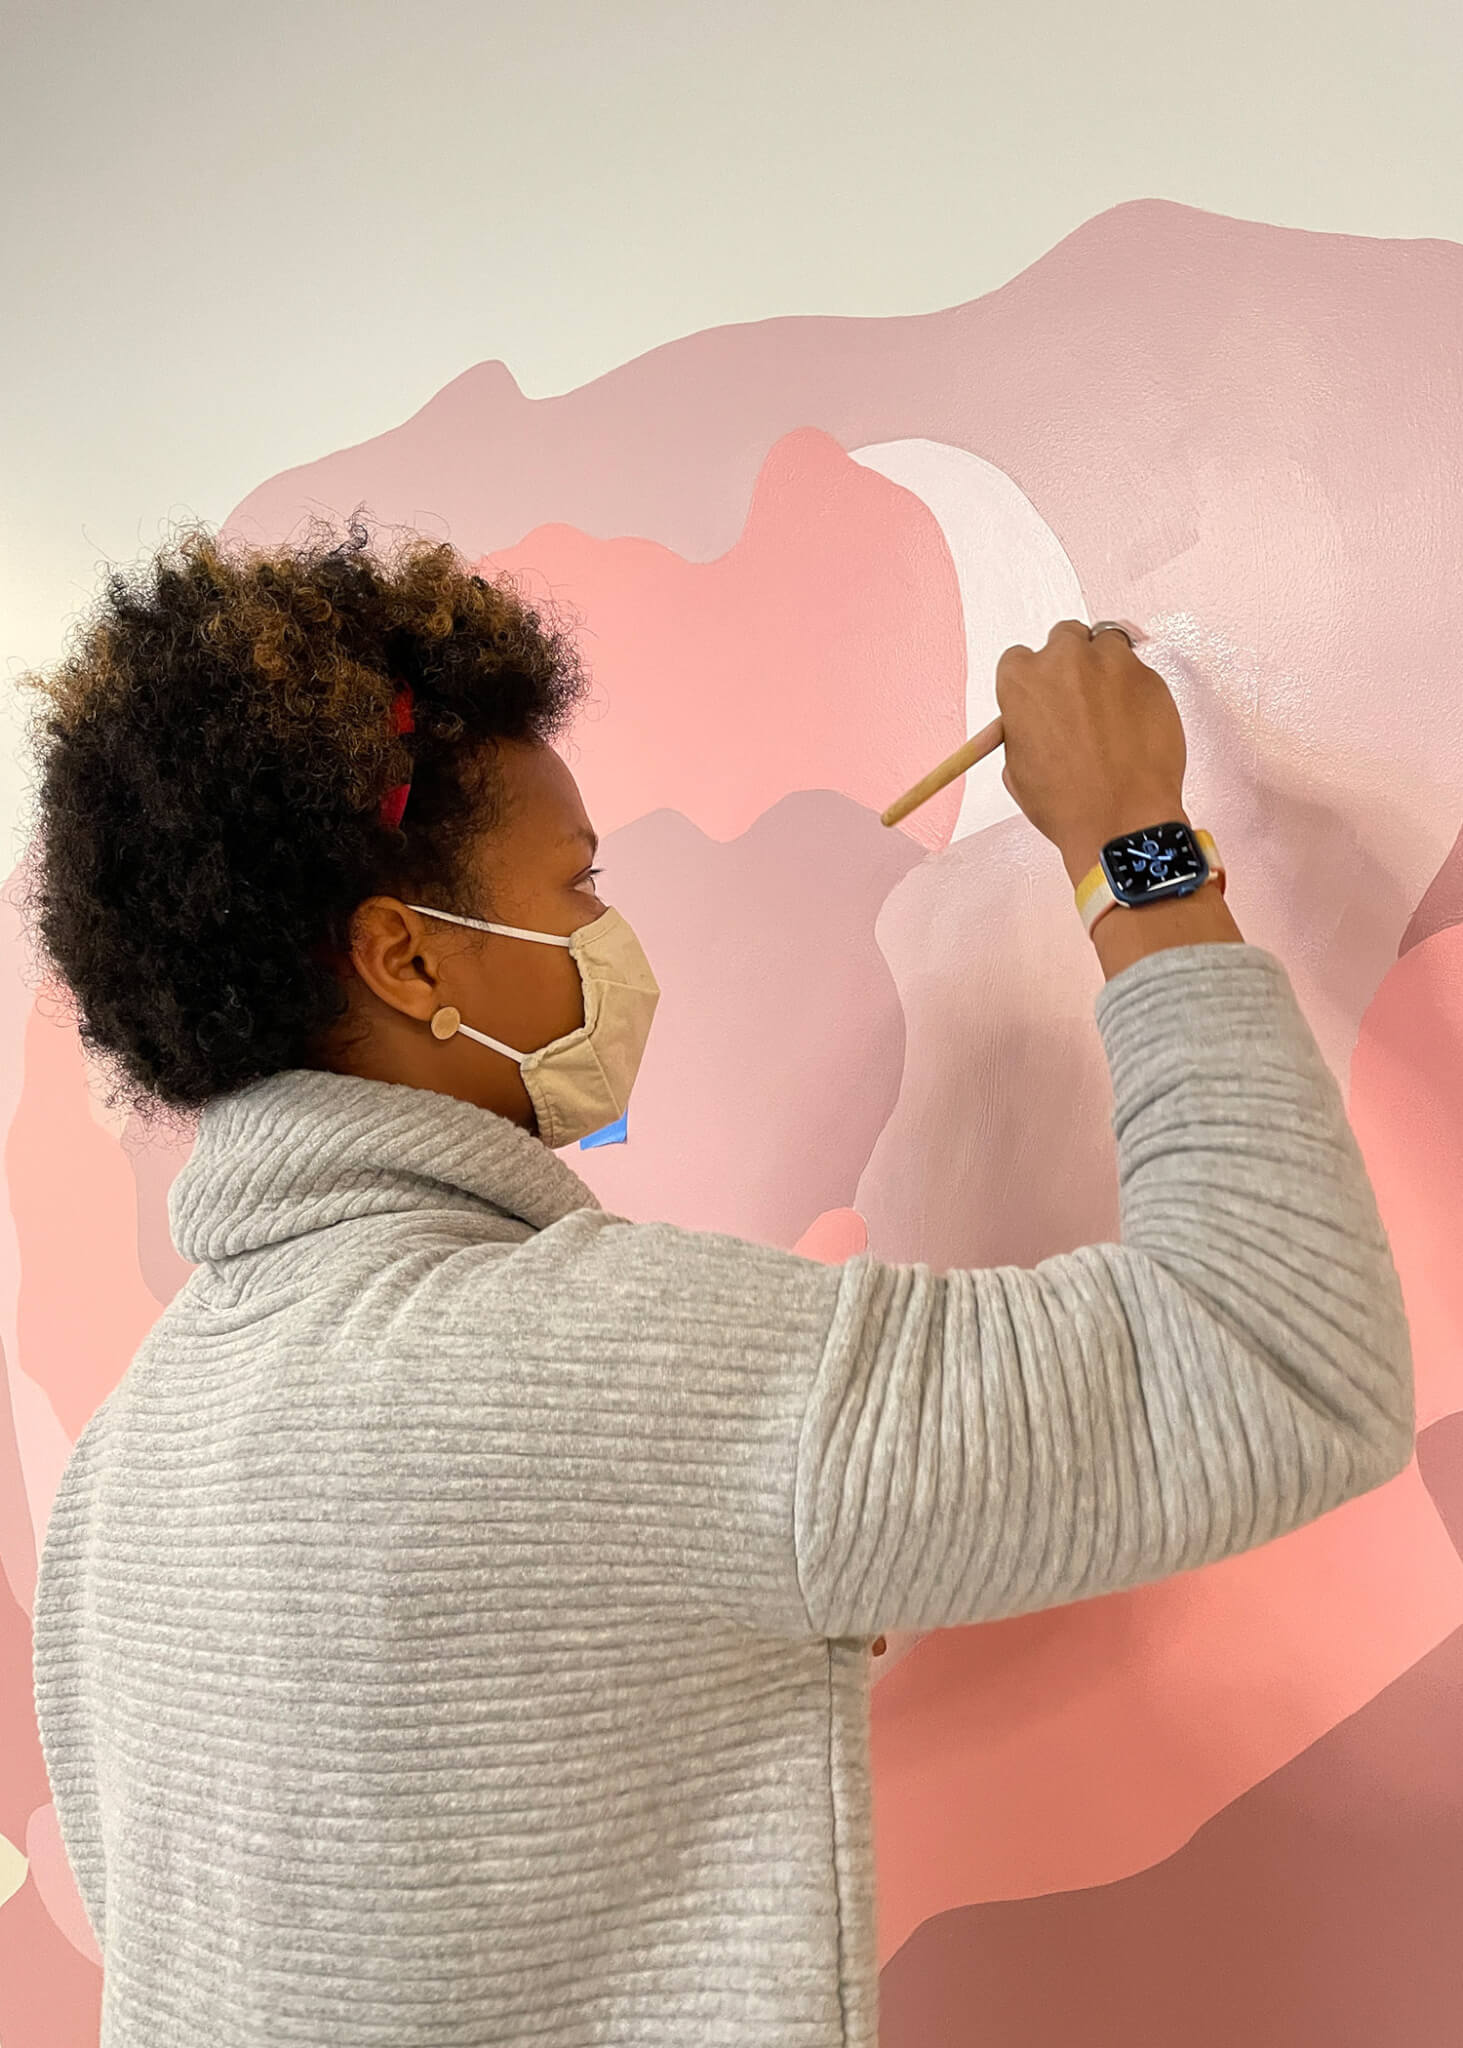 a woman paints a large floral mural in various shades of pink